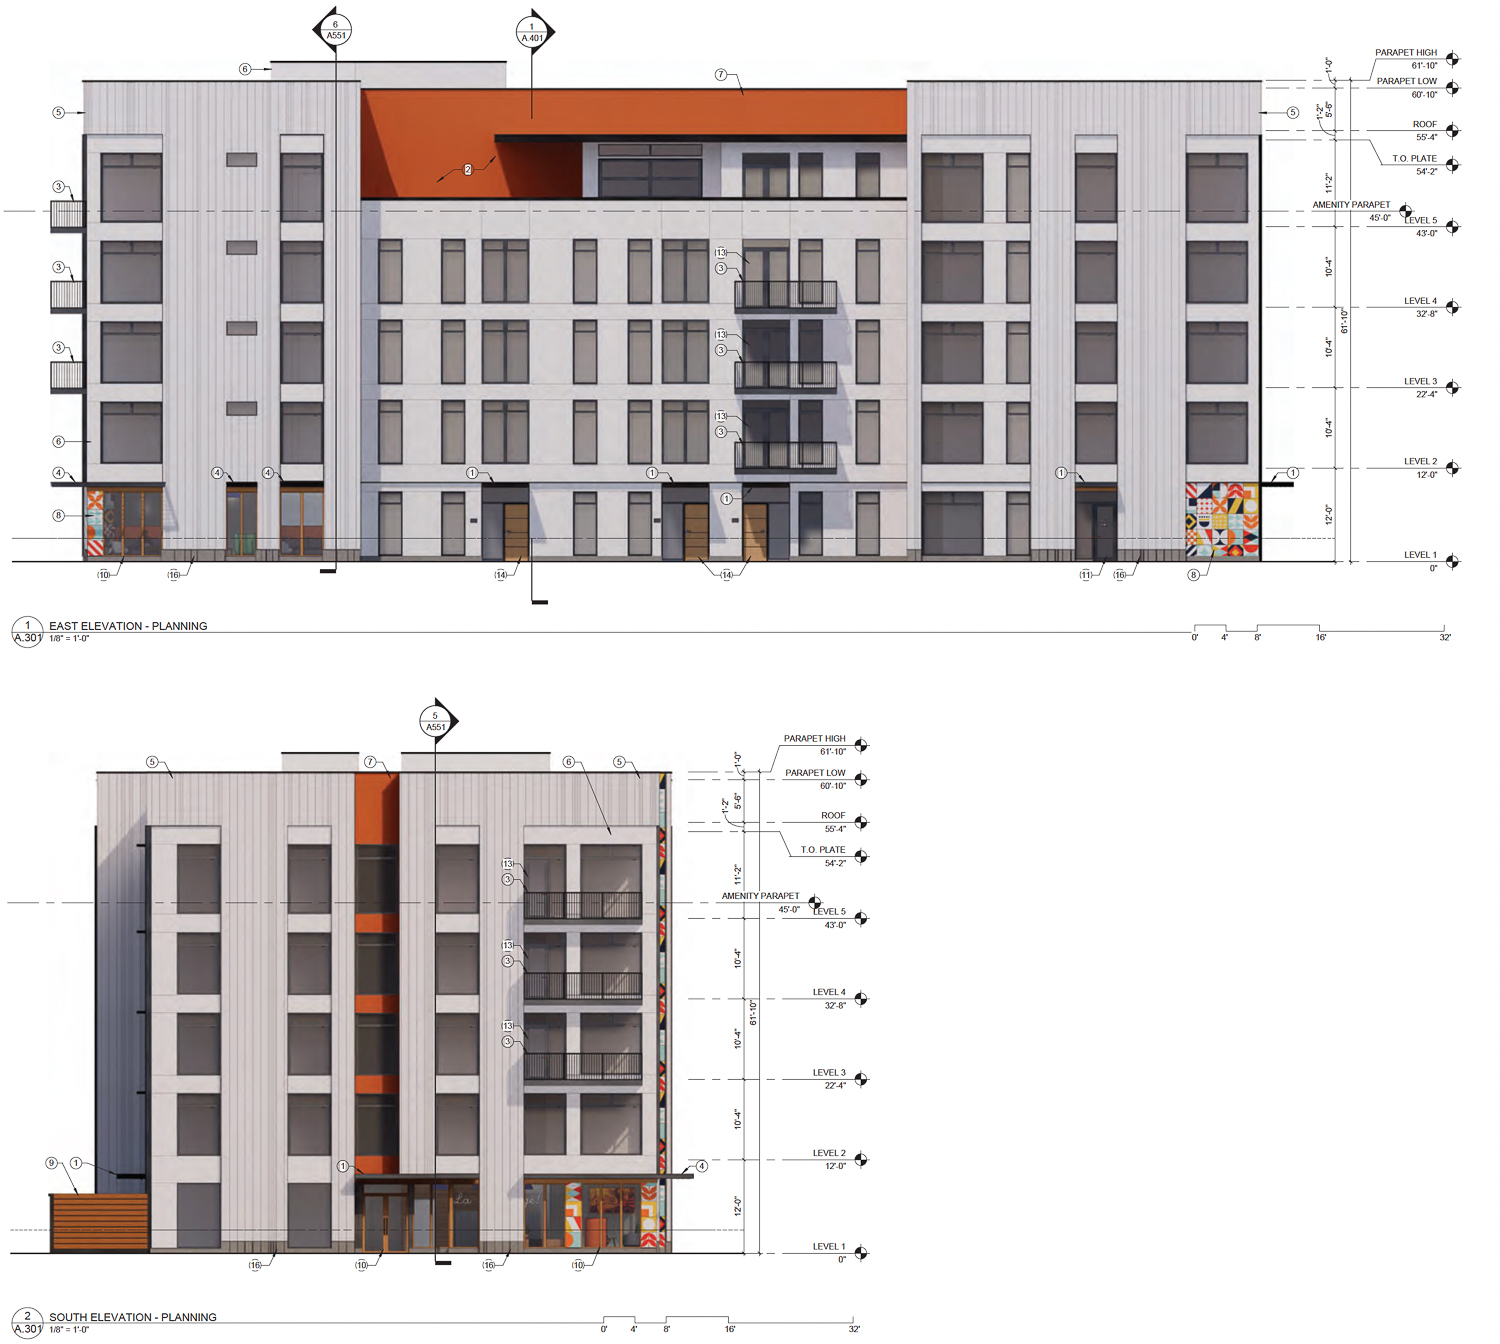 20th Place Project at 1925 F Street facade elevations, illustration by C2K Architecture